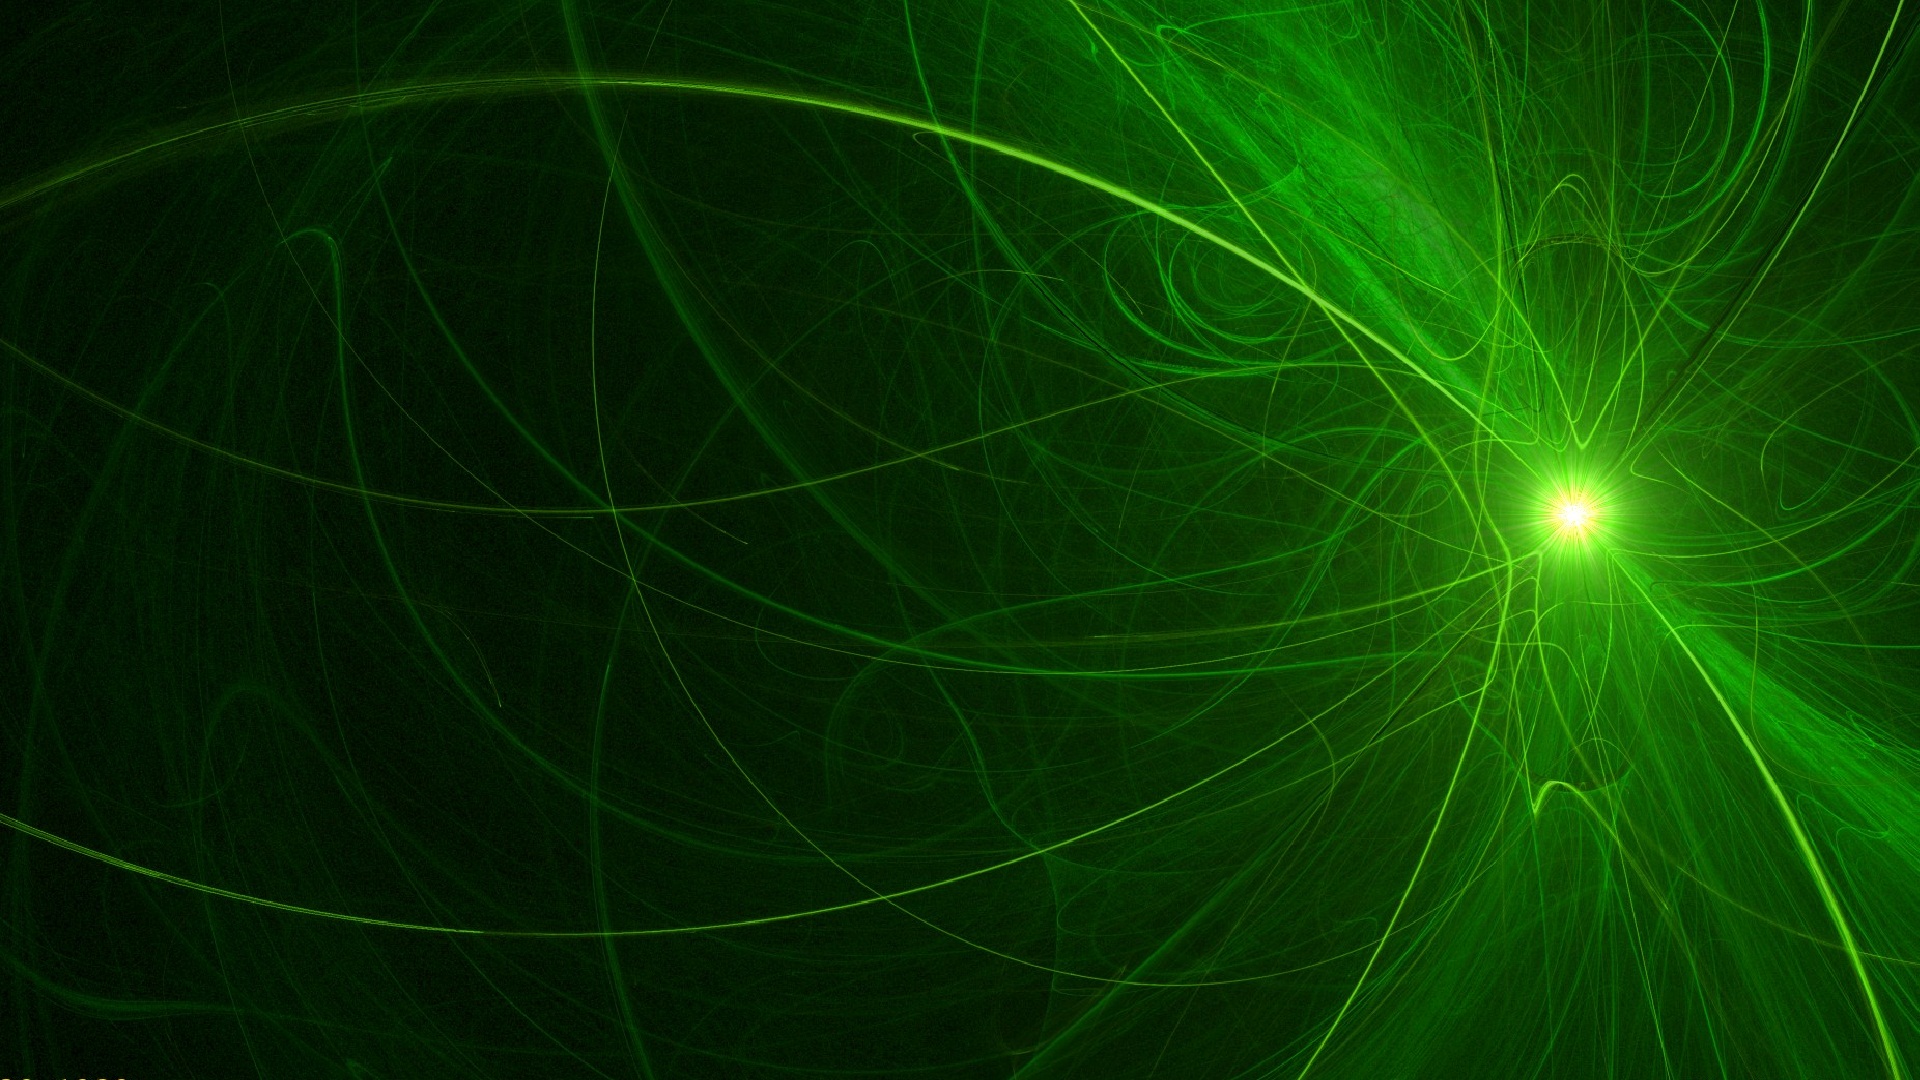 Black and Green Wallpaper HD with image resolution 1920x1080 pixel. You can make this wallpaper for your Desktop Computer Backgrounds, Mac Wallpapers, Android Lock screen or iPhone Screensavers